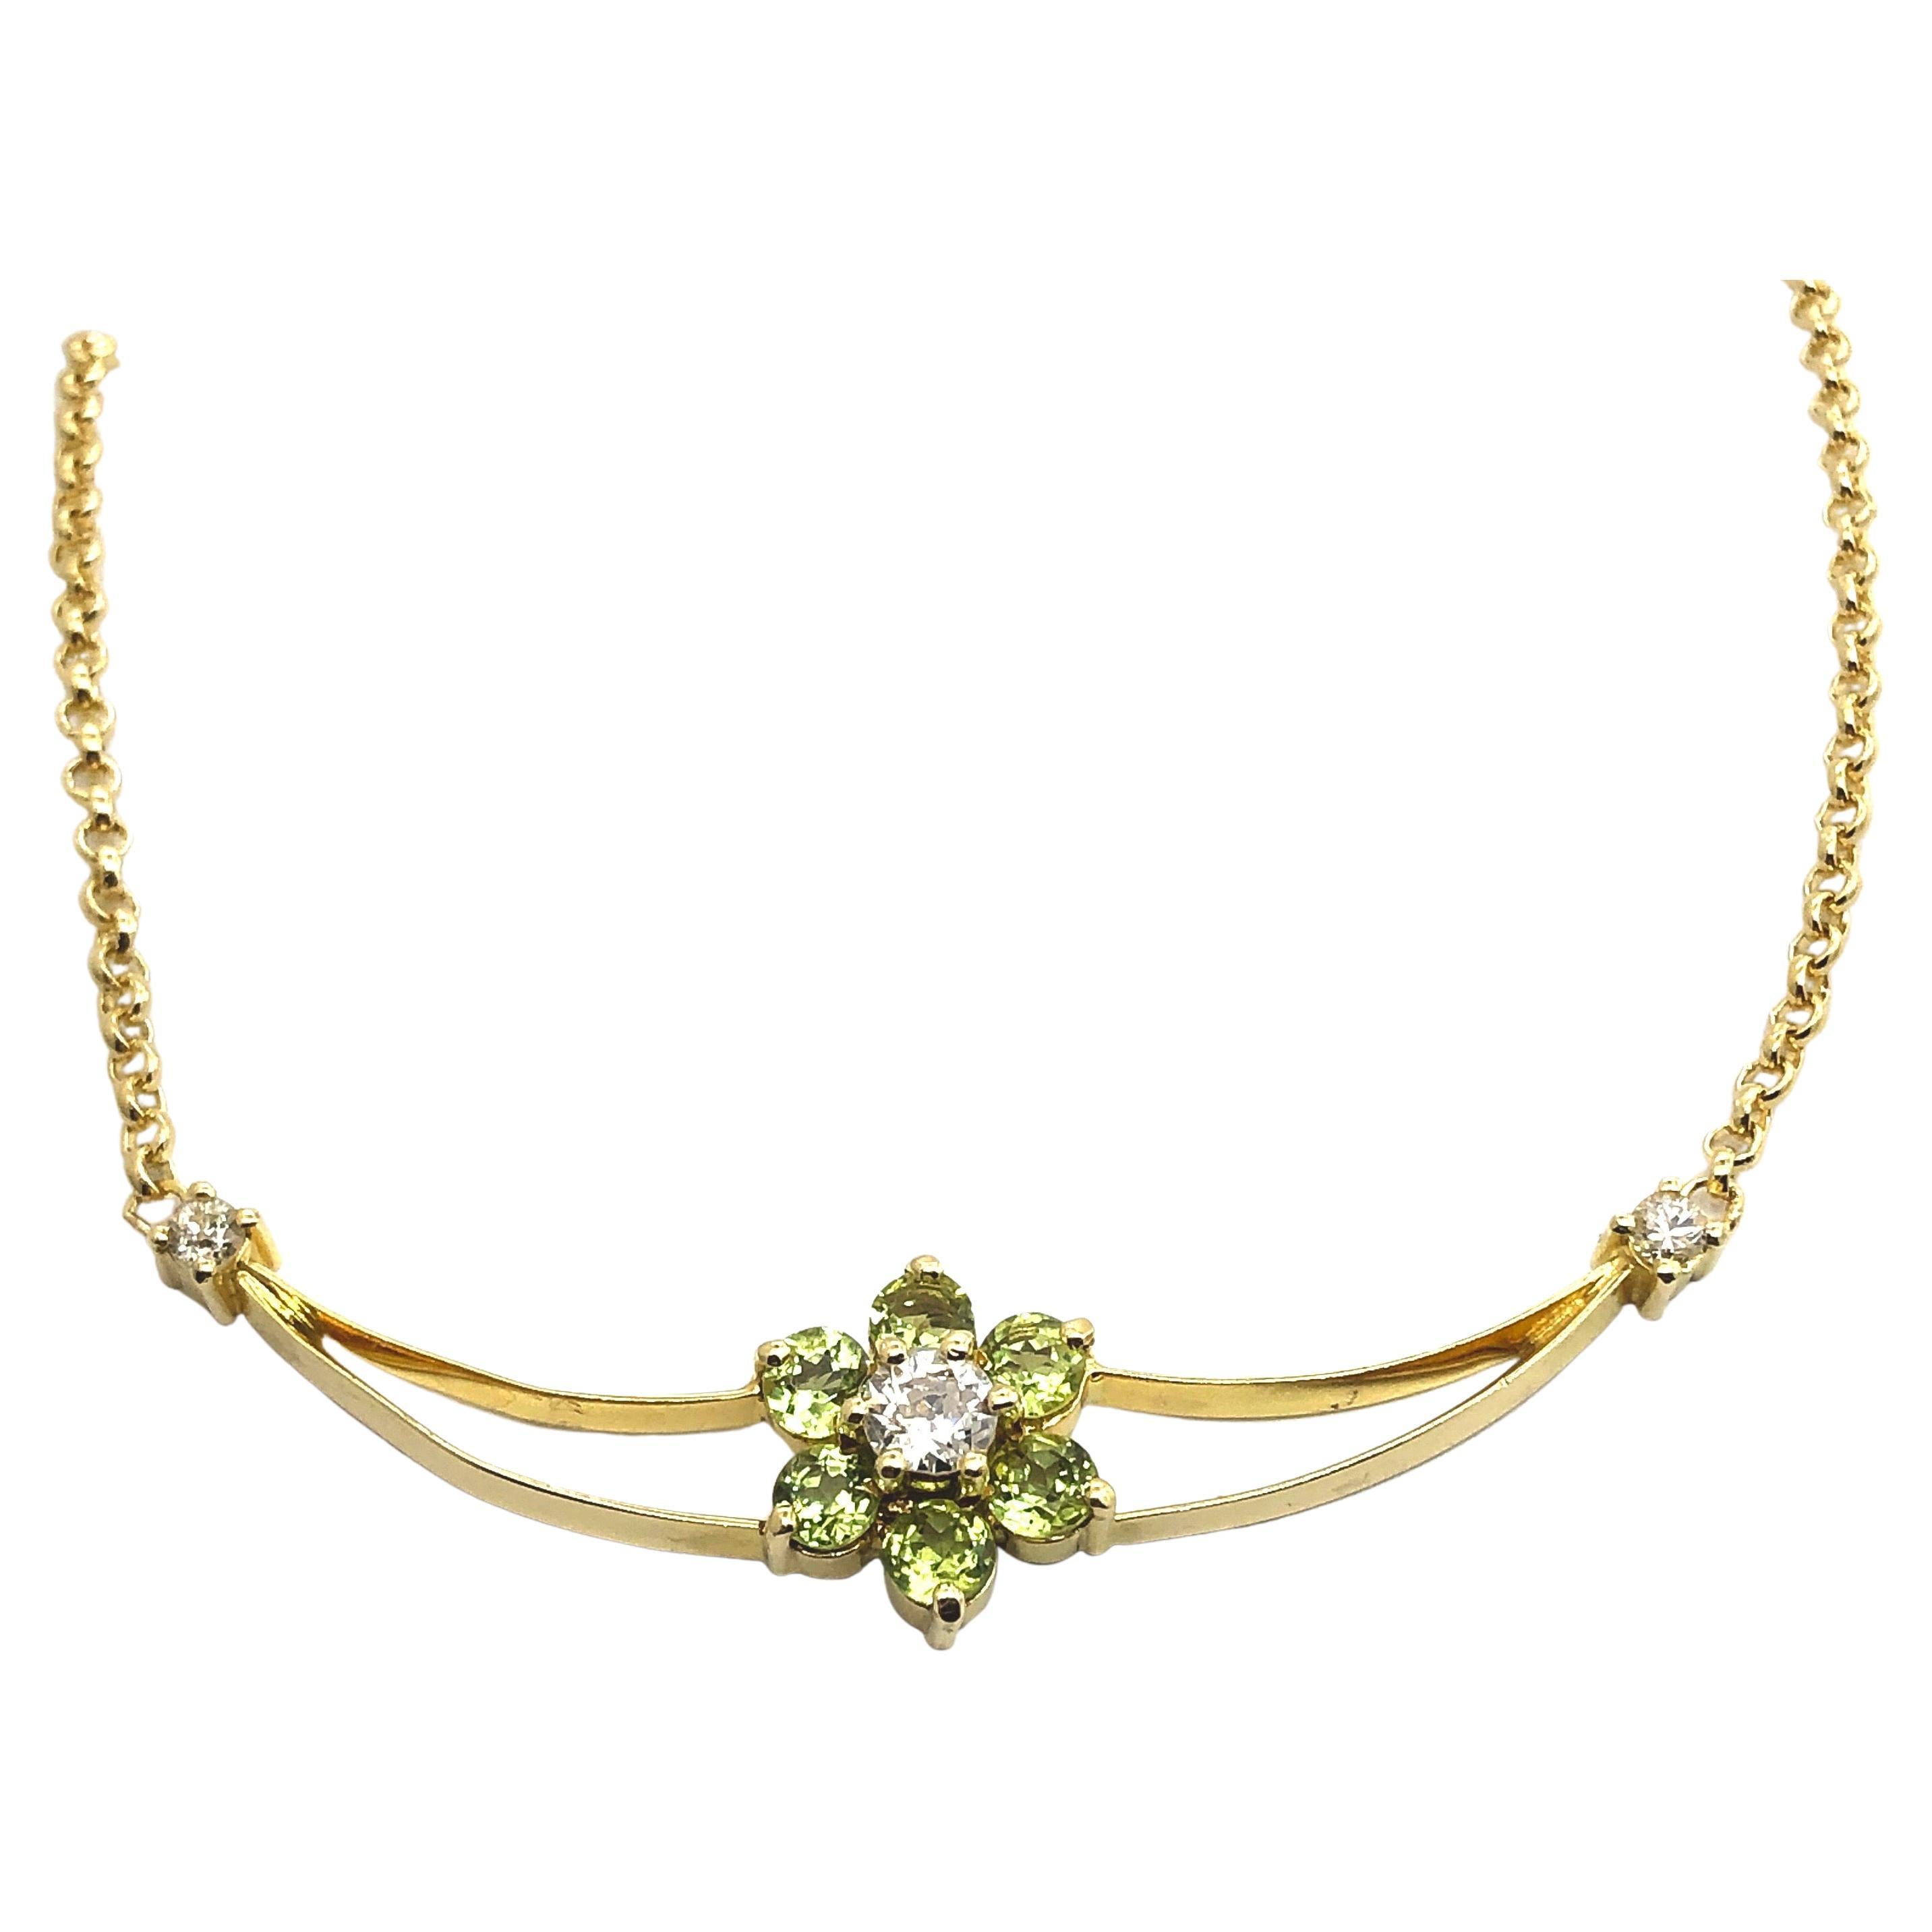 Gold Lavaliere Pendant Necklace with Three Diamonds and Six Peridots